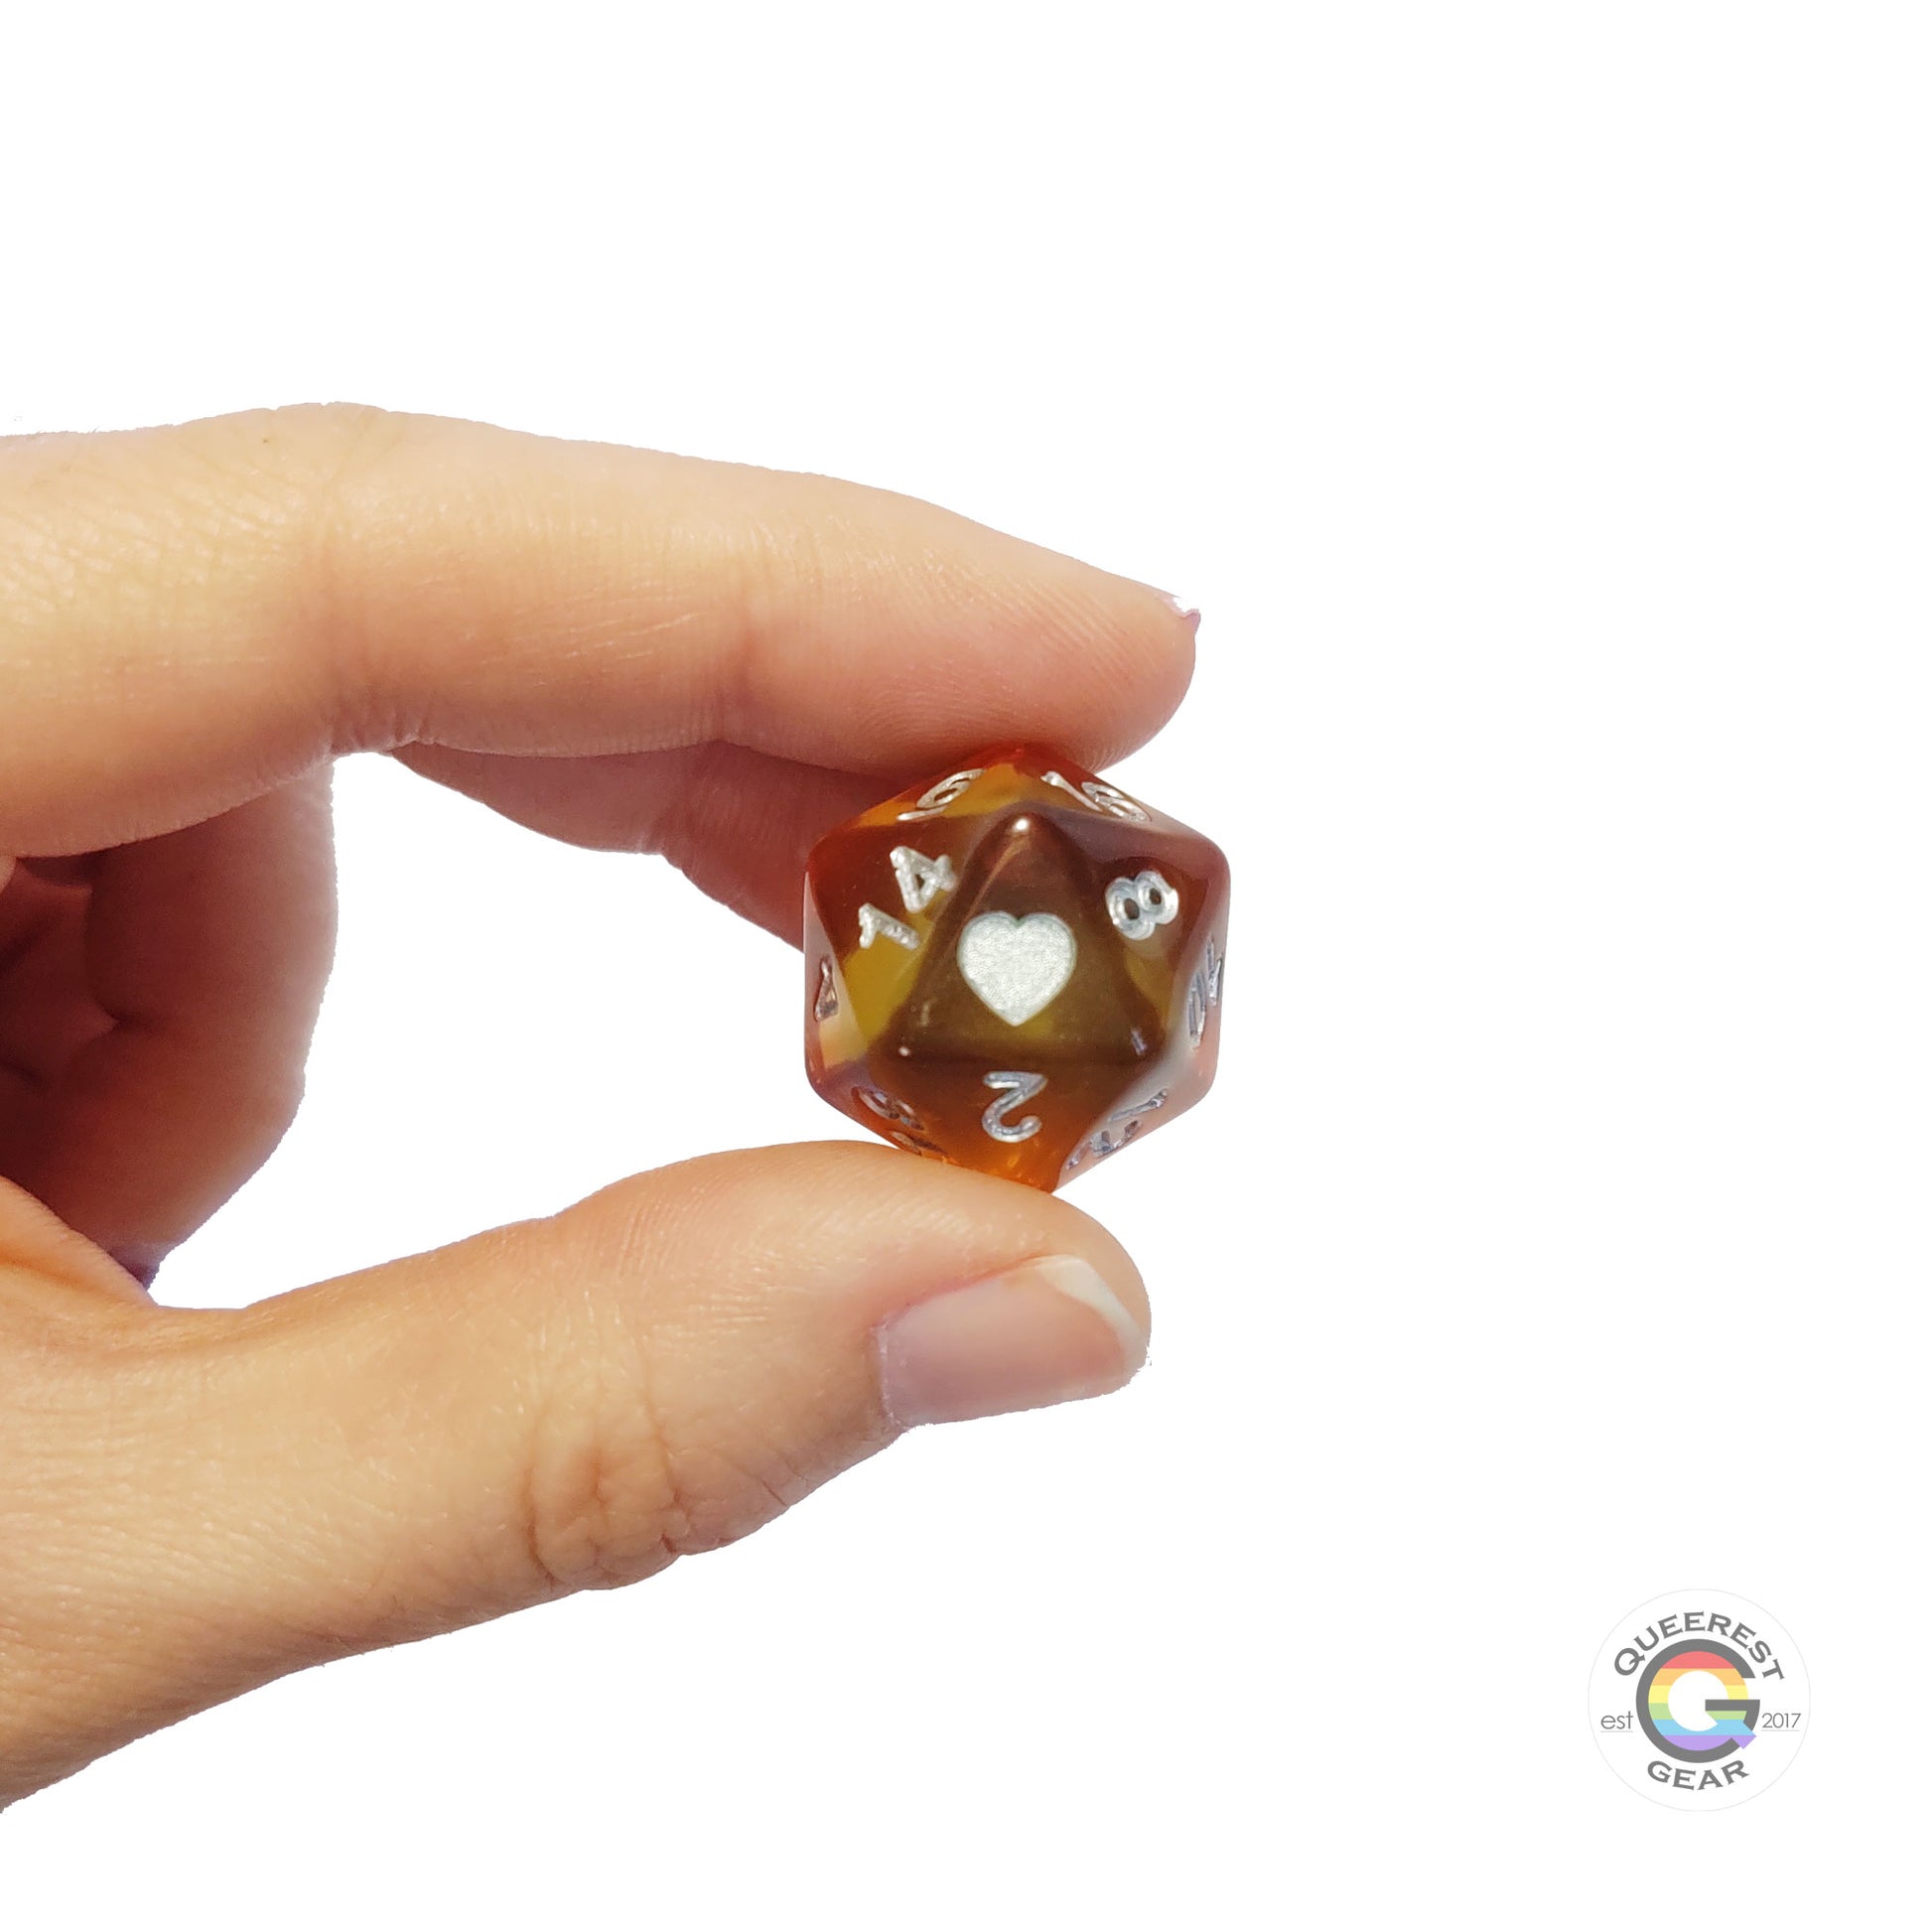 A hand holding up the pansexual d20 to show off the color, heart, and transparency